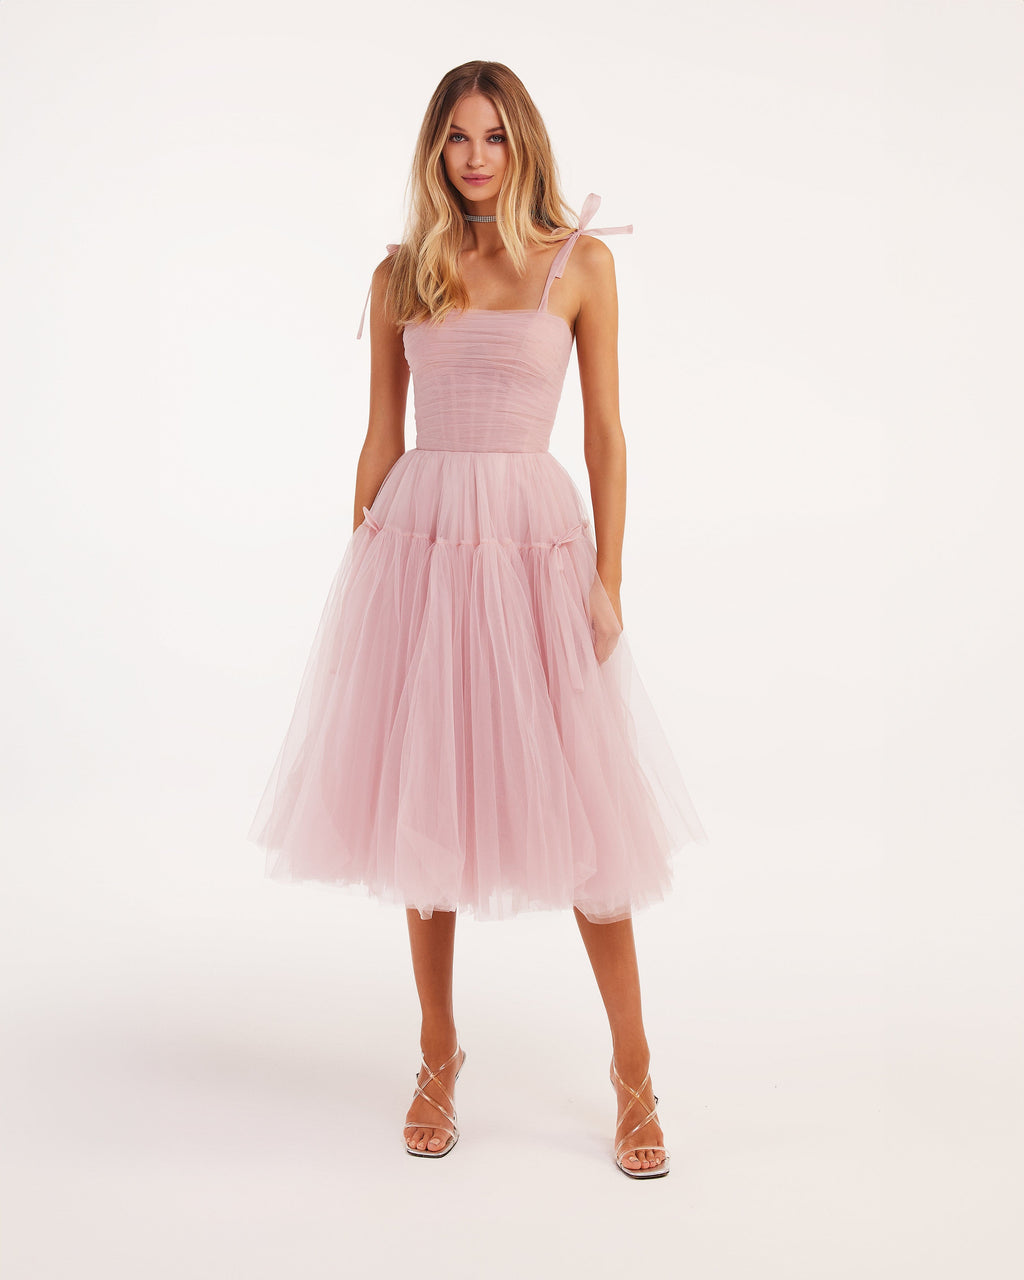 B253020 Charming Soft Tulle A-line Midi Length Gown with Ruched